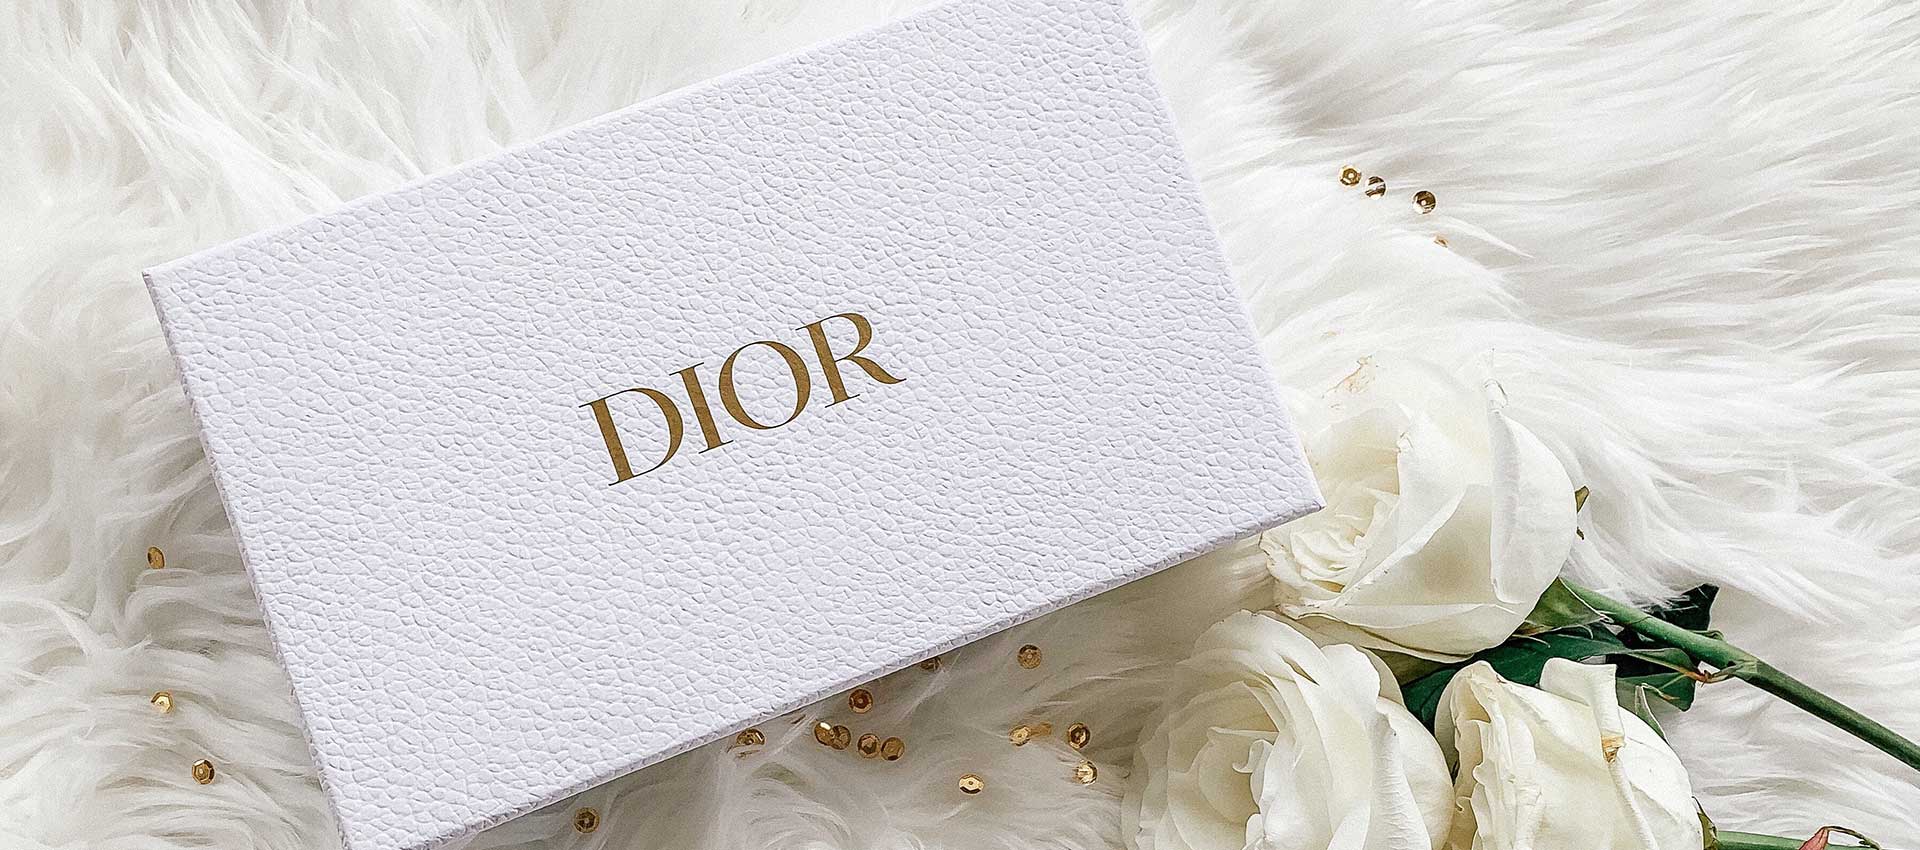 Christian Dior Pakistan - Latest Products and Reviews 2020